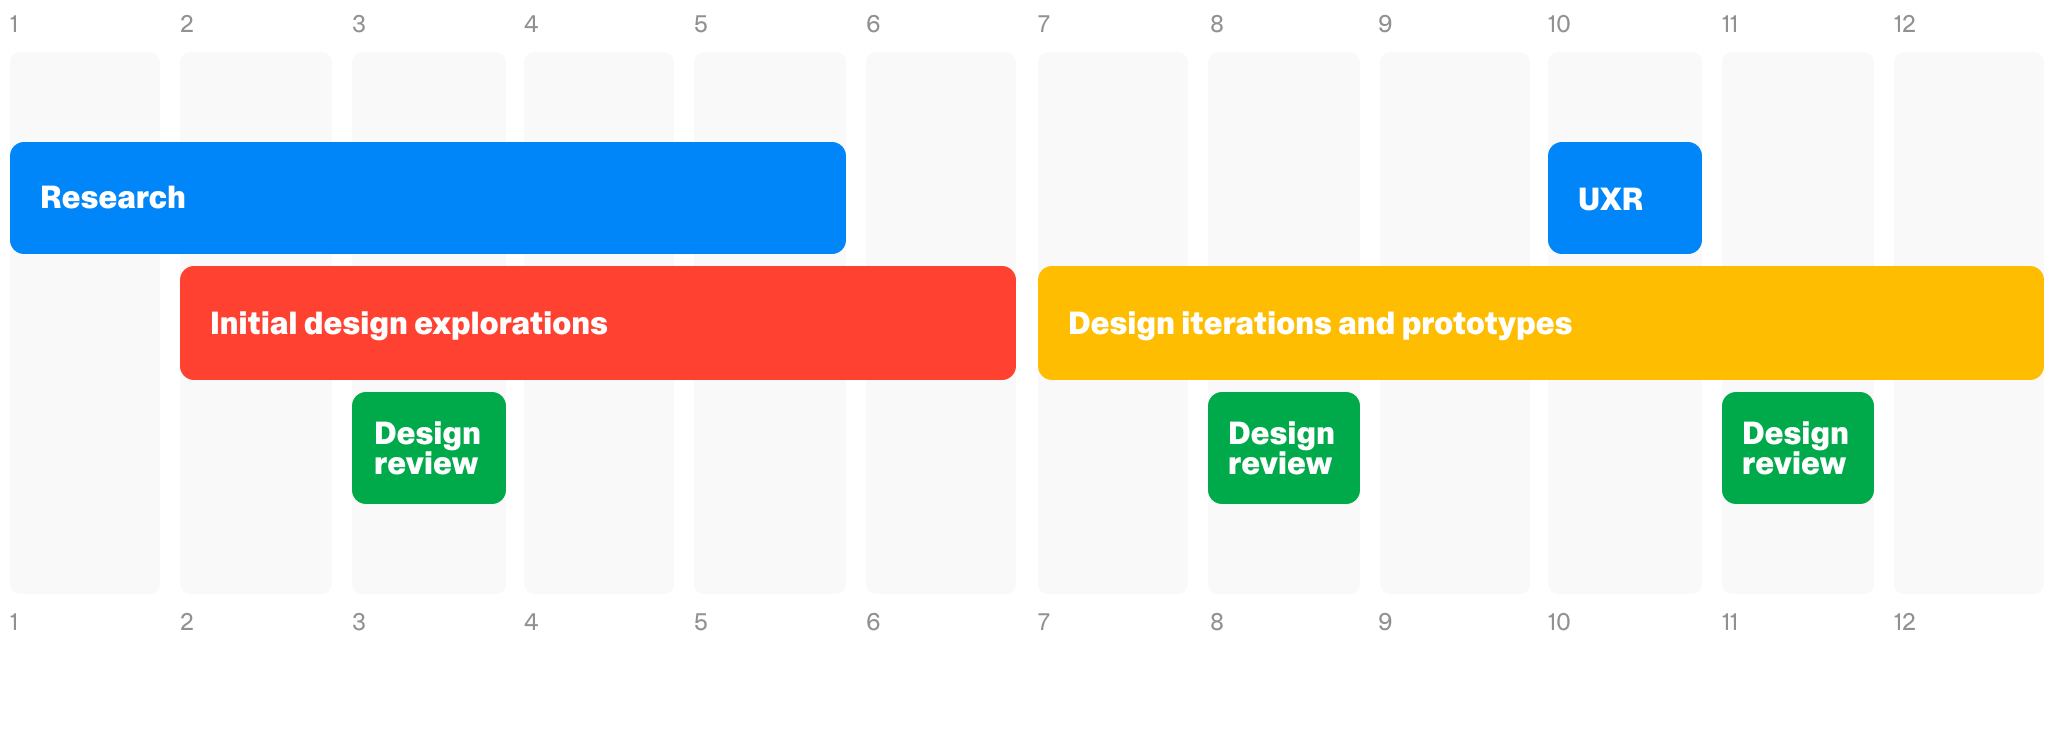 A timeline of my internship project and design process.